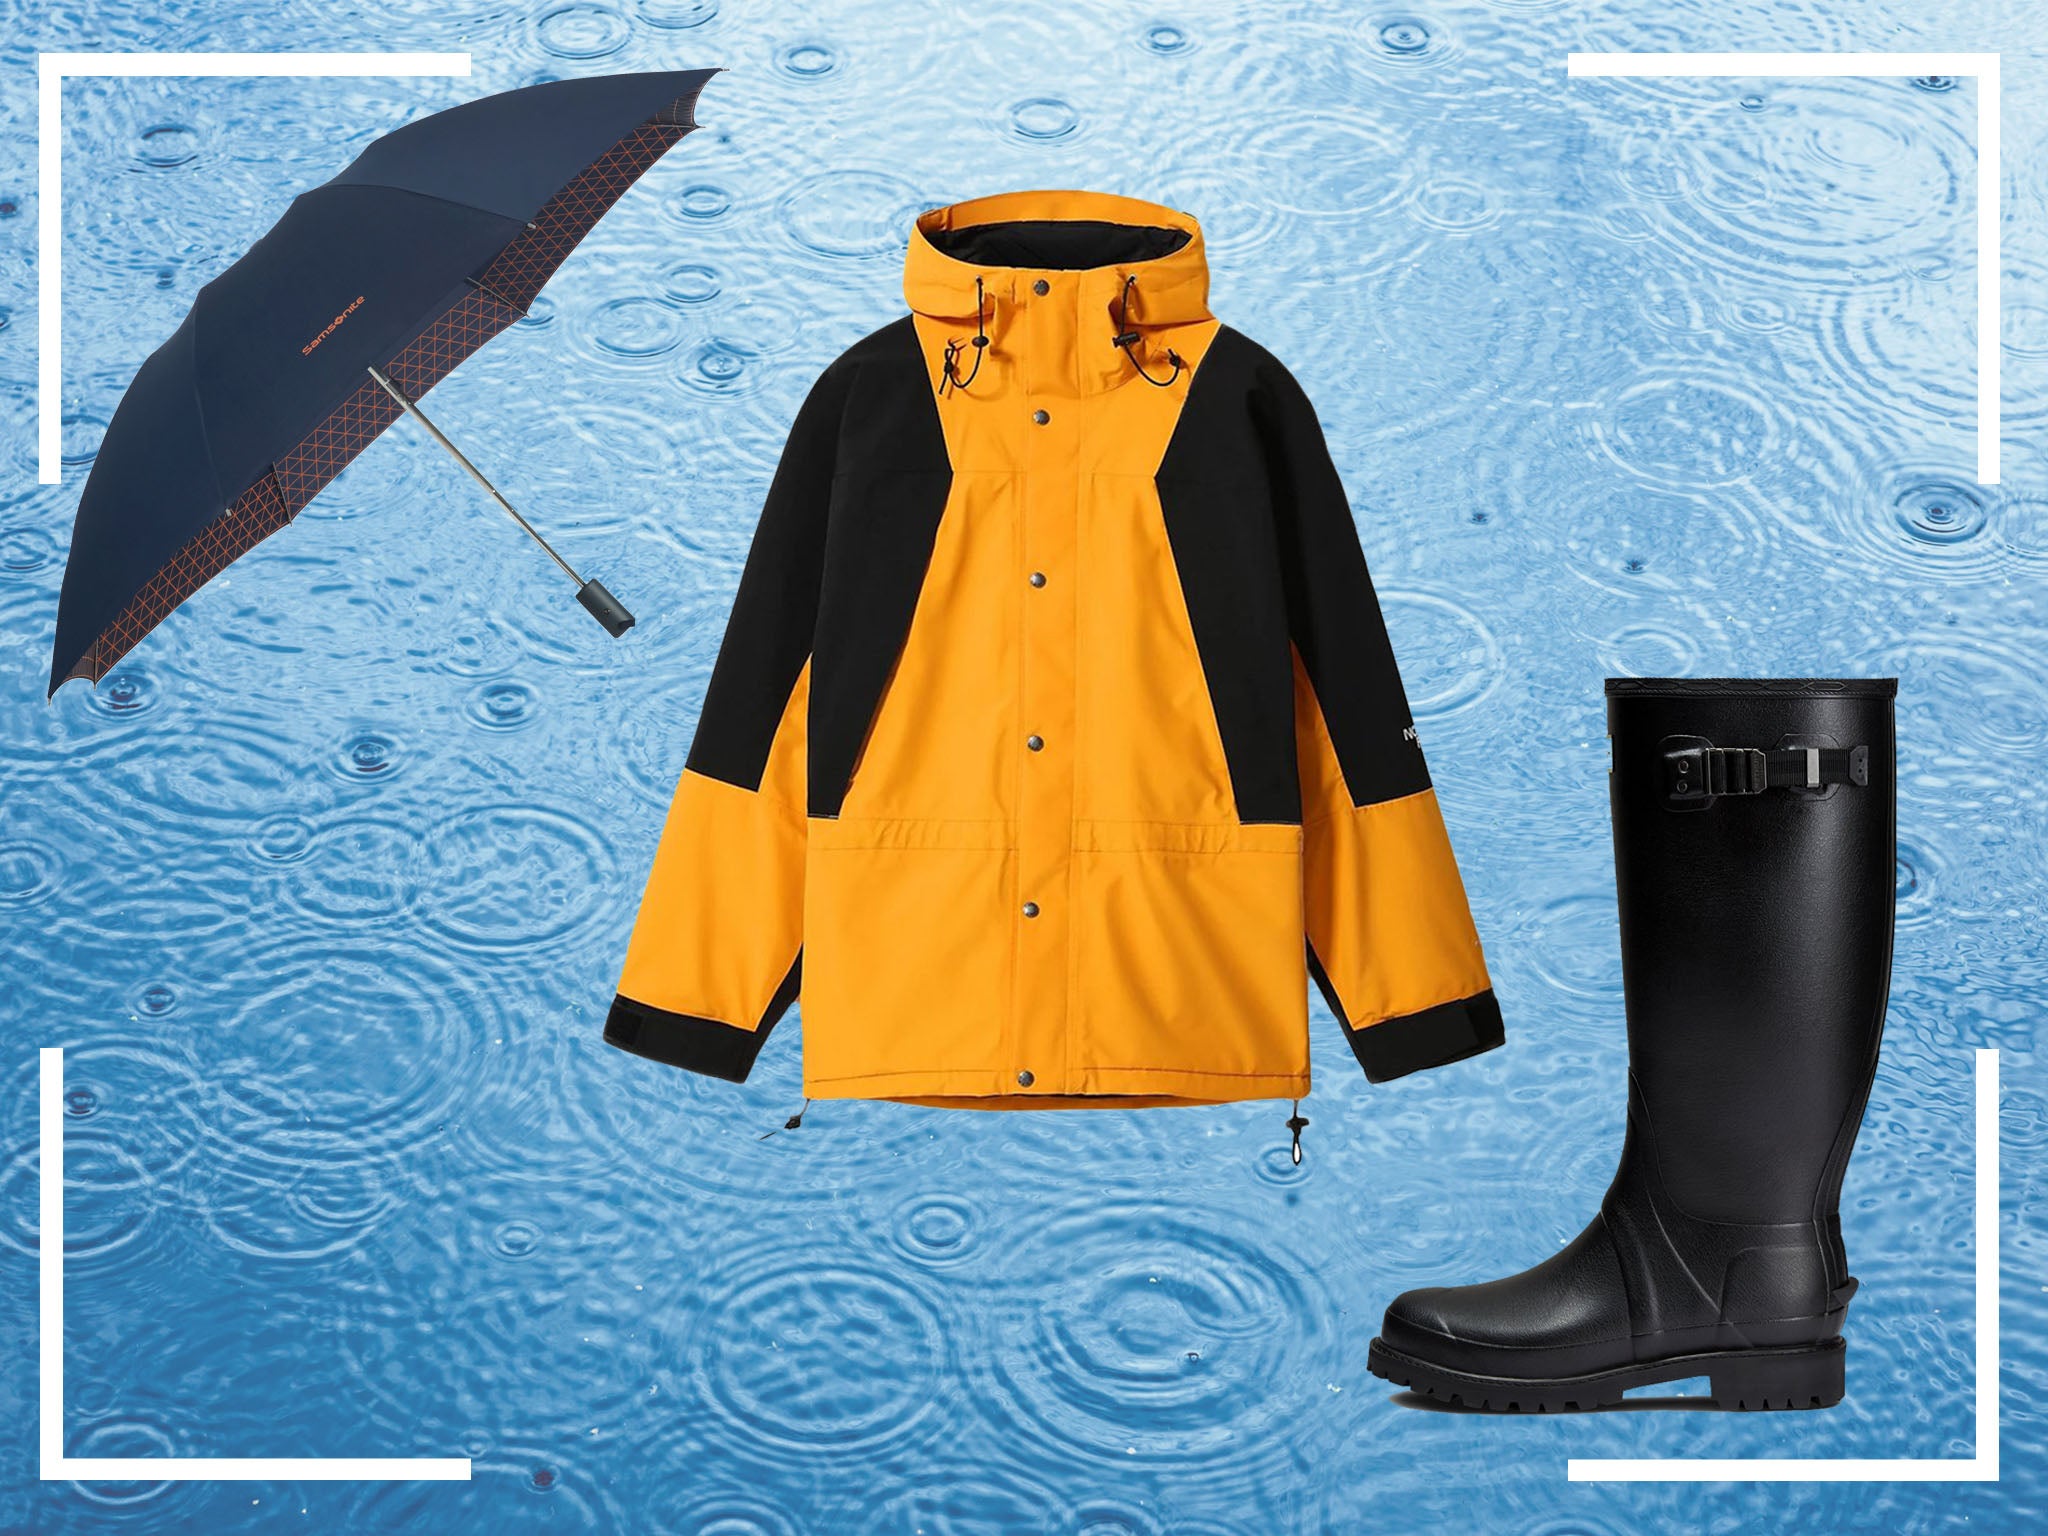 Storm Christoph: Everything you need to stay dry on rainy days